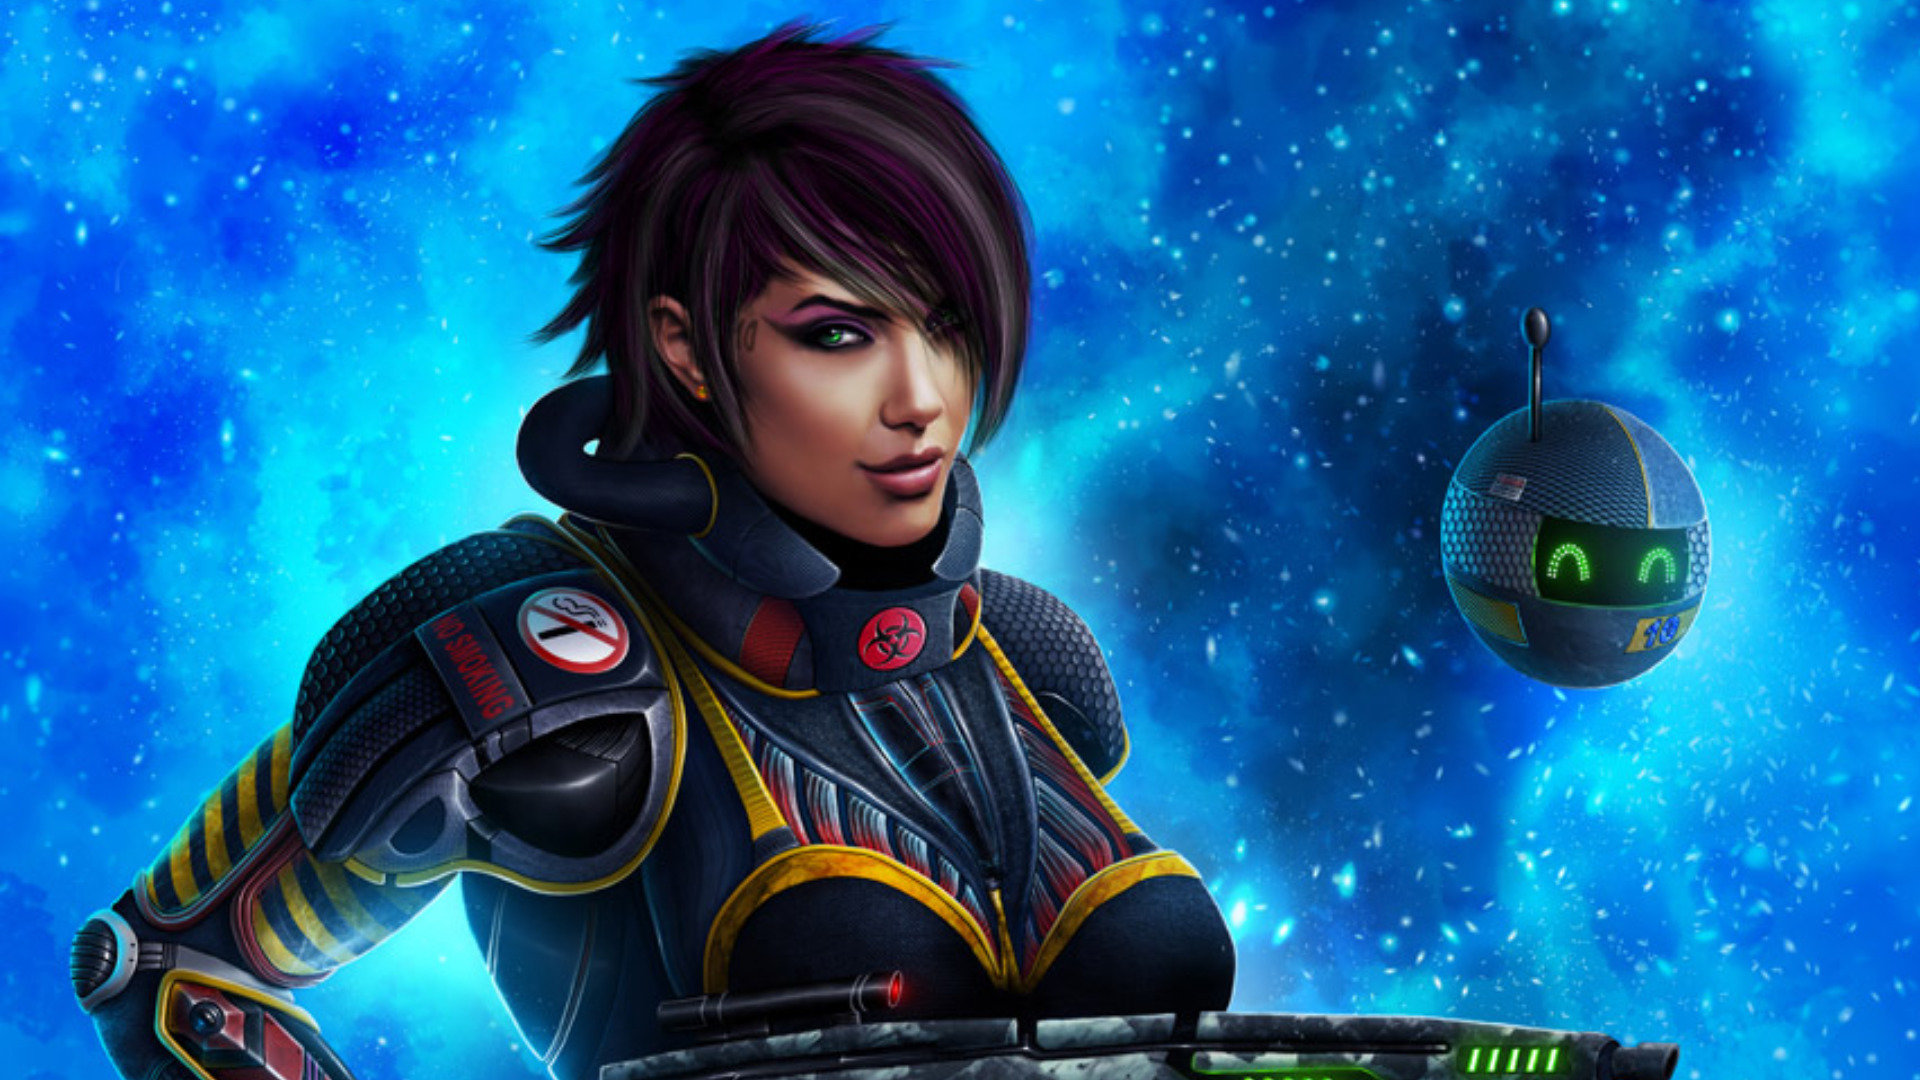 Download full hd 1920x1080 Space girl PC wallpaper ID:71904 for free